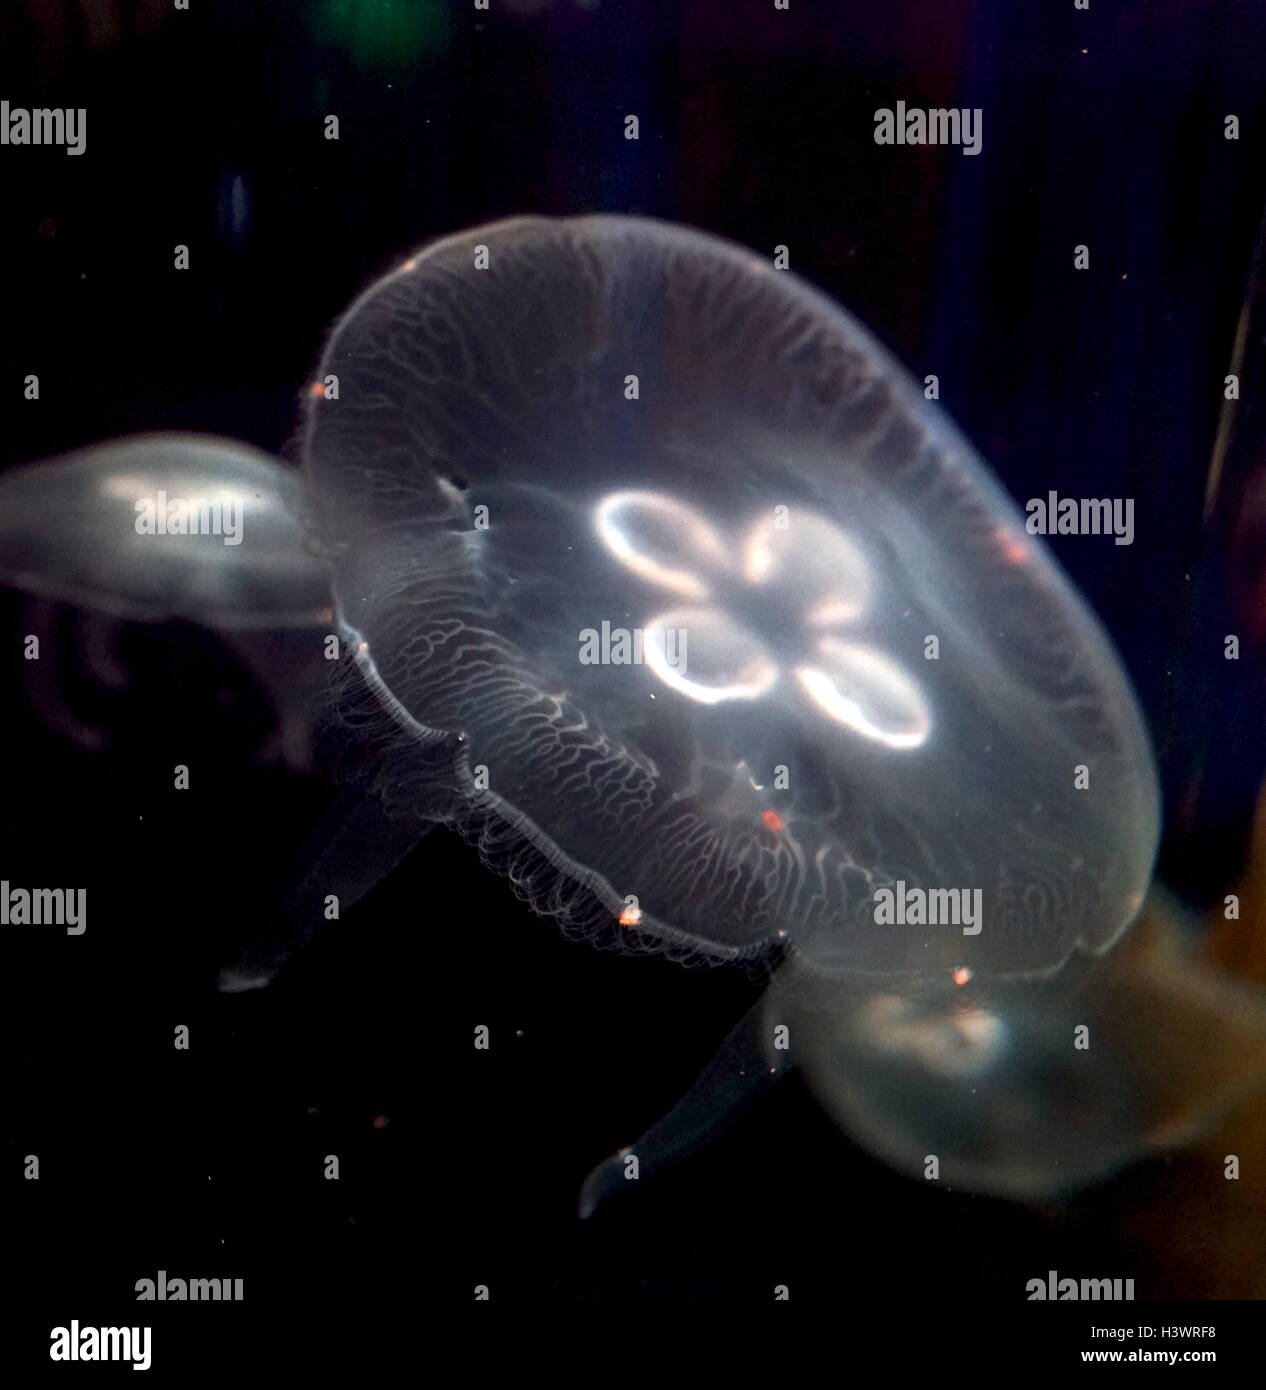 Moon Jelly, Jellyfish. Jellyfish are the major non-polyp form of individuals of the phylum Cnidaria. They are typified as free-swimming marine animals consisting of a gelatinous umbrella-shaped bell and trailing tentacles. The bell can pulsate for locomotion, while stinging tentacles can be used to capture prey. Stock Photo